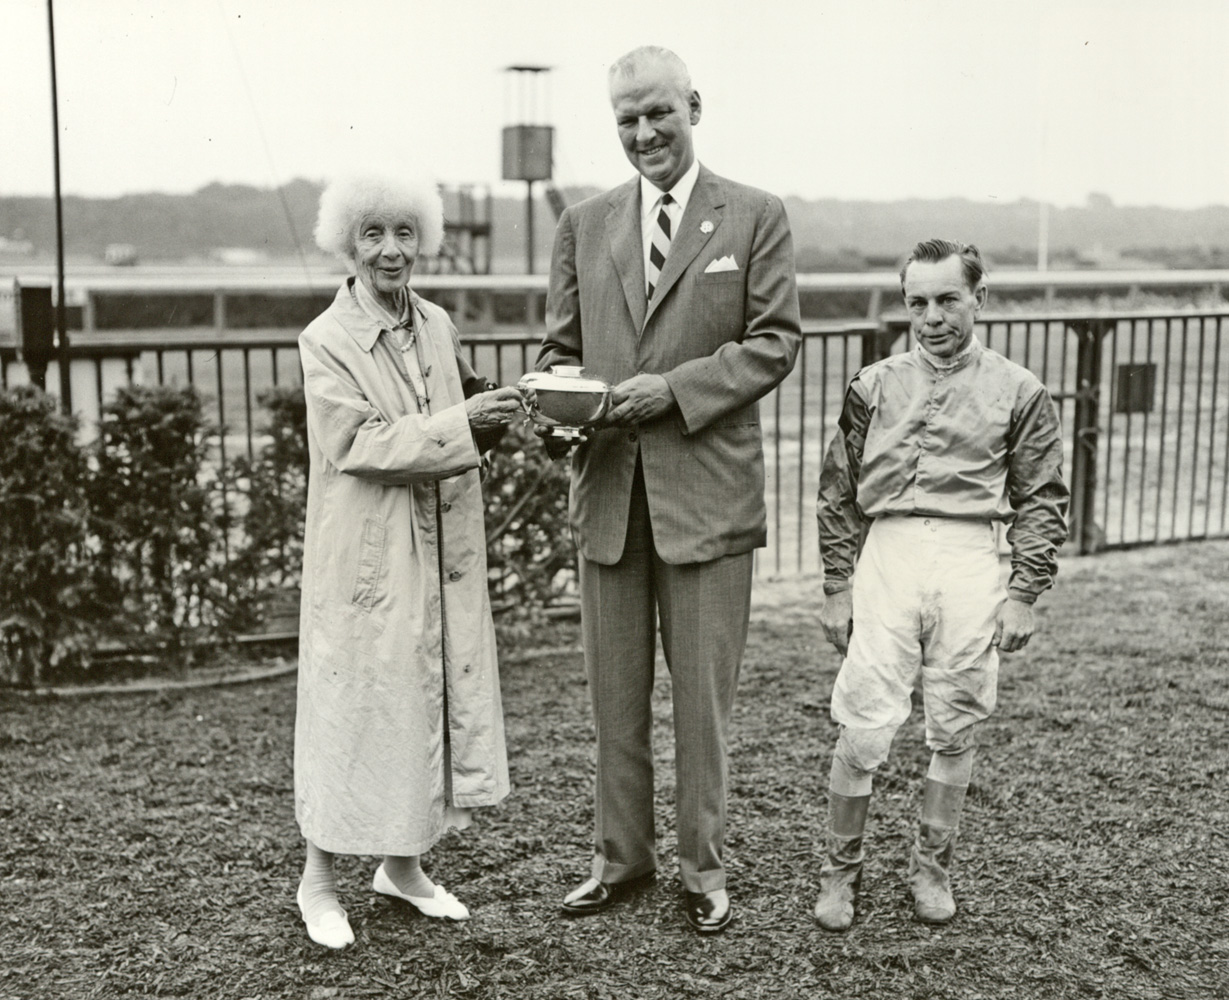 Gladys Mills Phipps, F. C. Rand, and R. Woodhouse at a trophy presentation in 1962 (Keeneland Library Thoroughbred Times Collection)